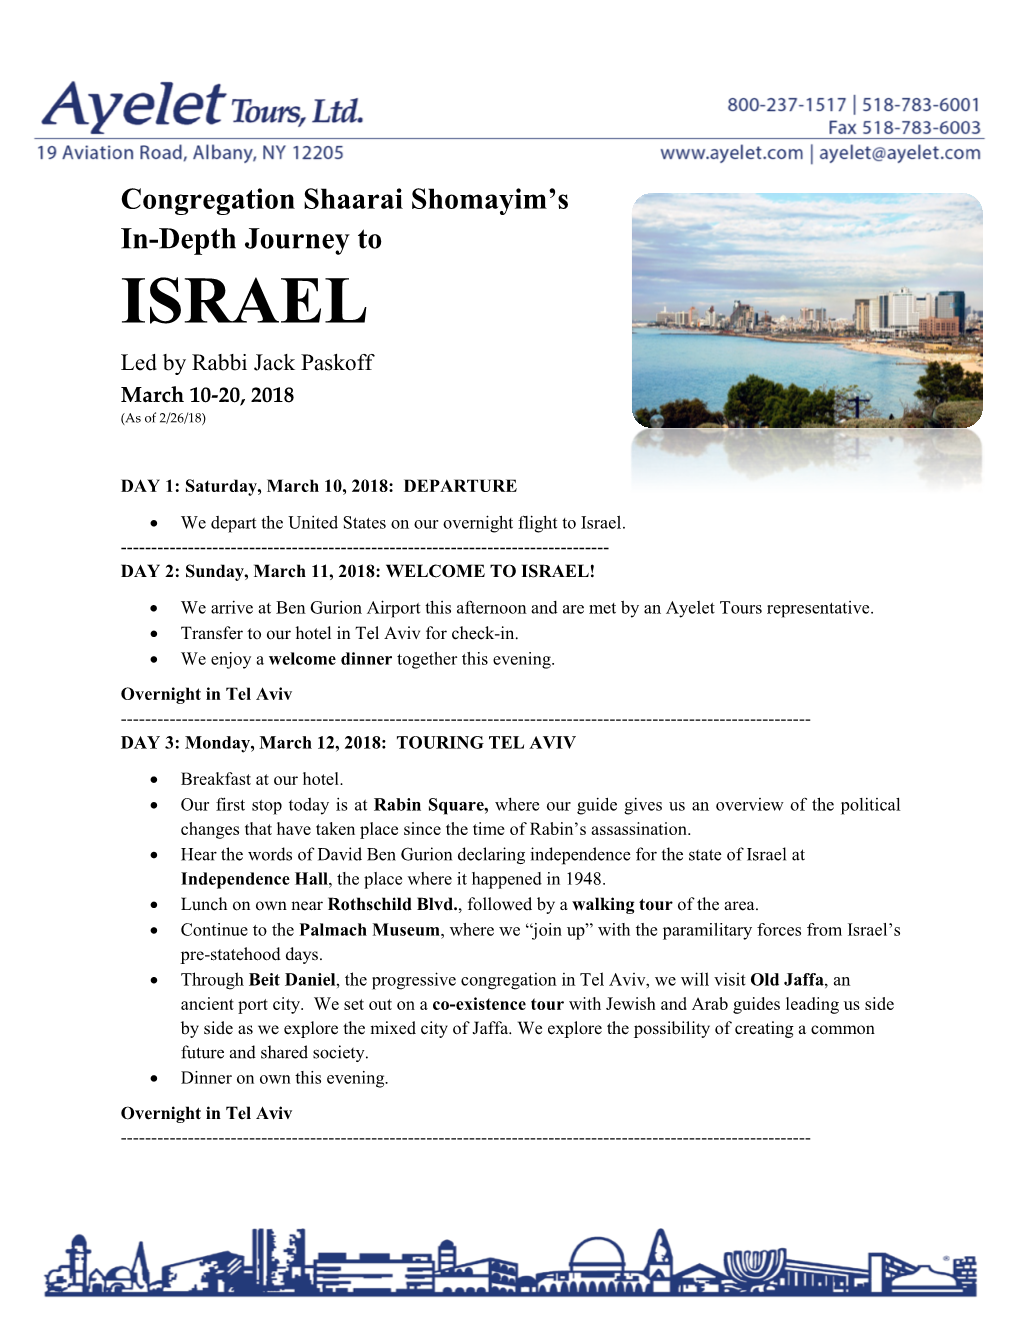 ISRAEL Led by Rabbi Jack Paskoff March 10-20, 2018 (As of 2/26/18)